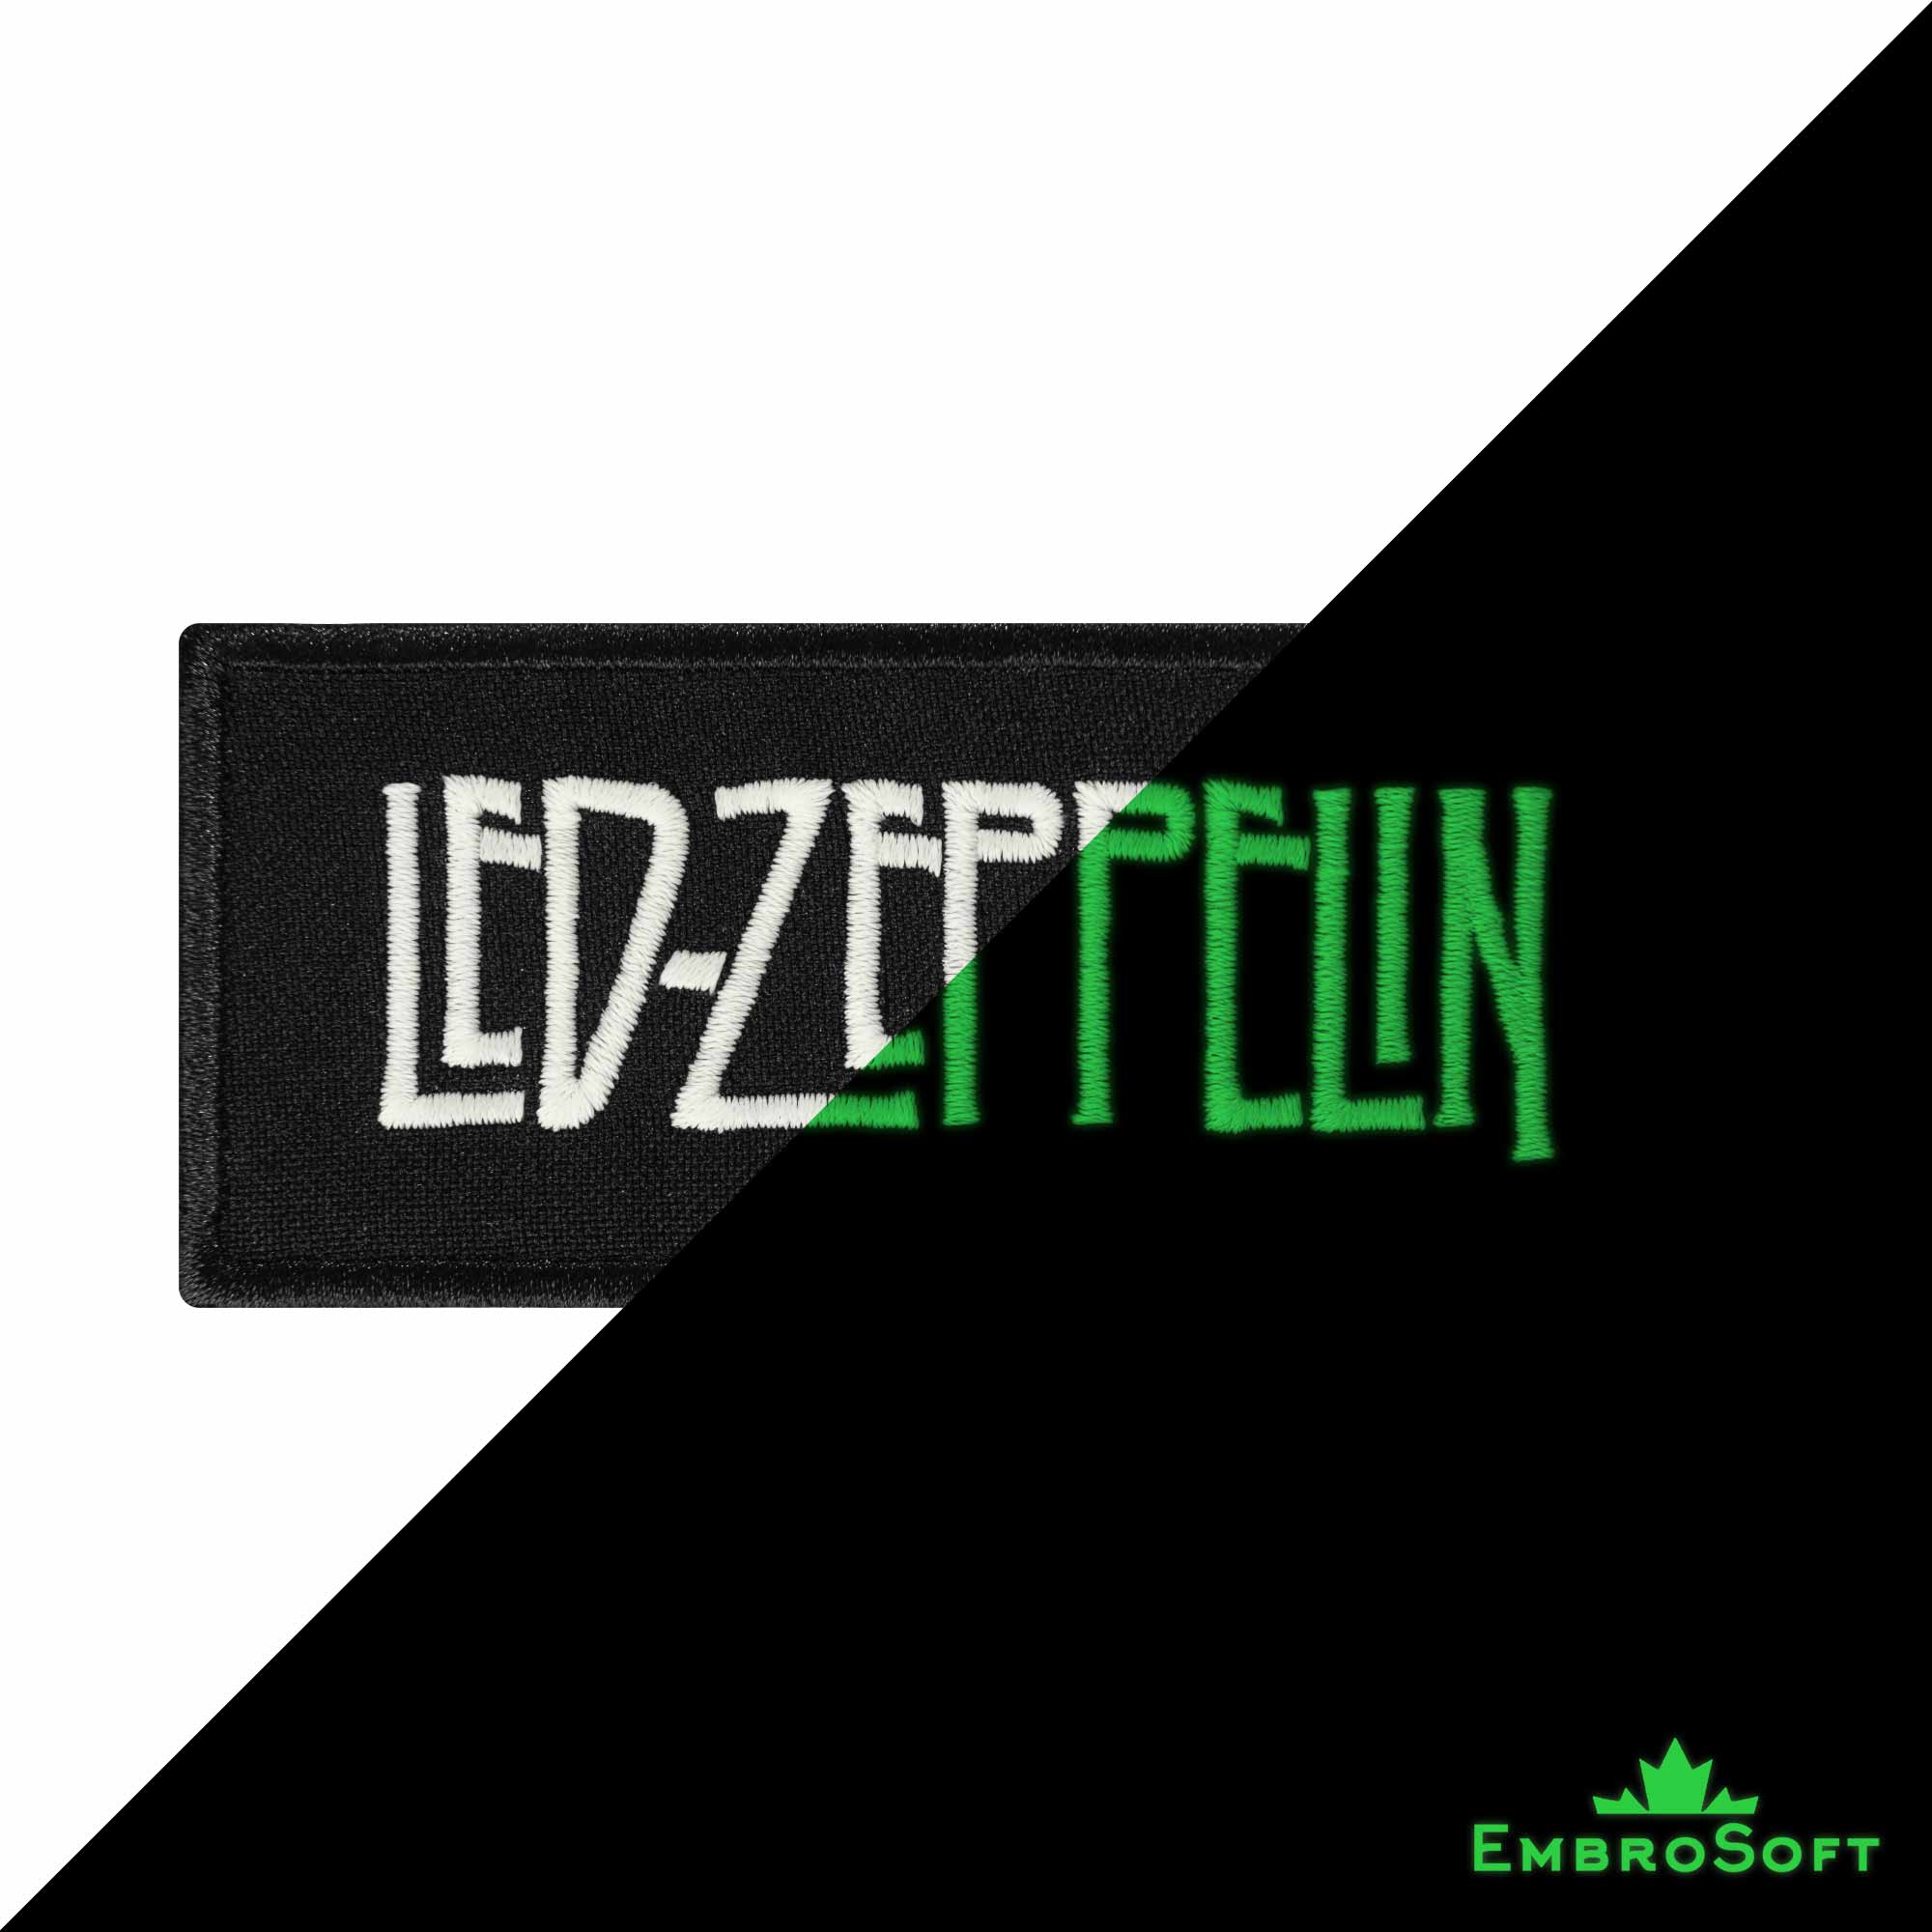 Zeppelin Logo - Led Zeppelin Logo Embroidered Glowing Patch (4.1 x 1.8)